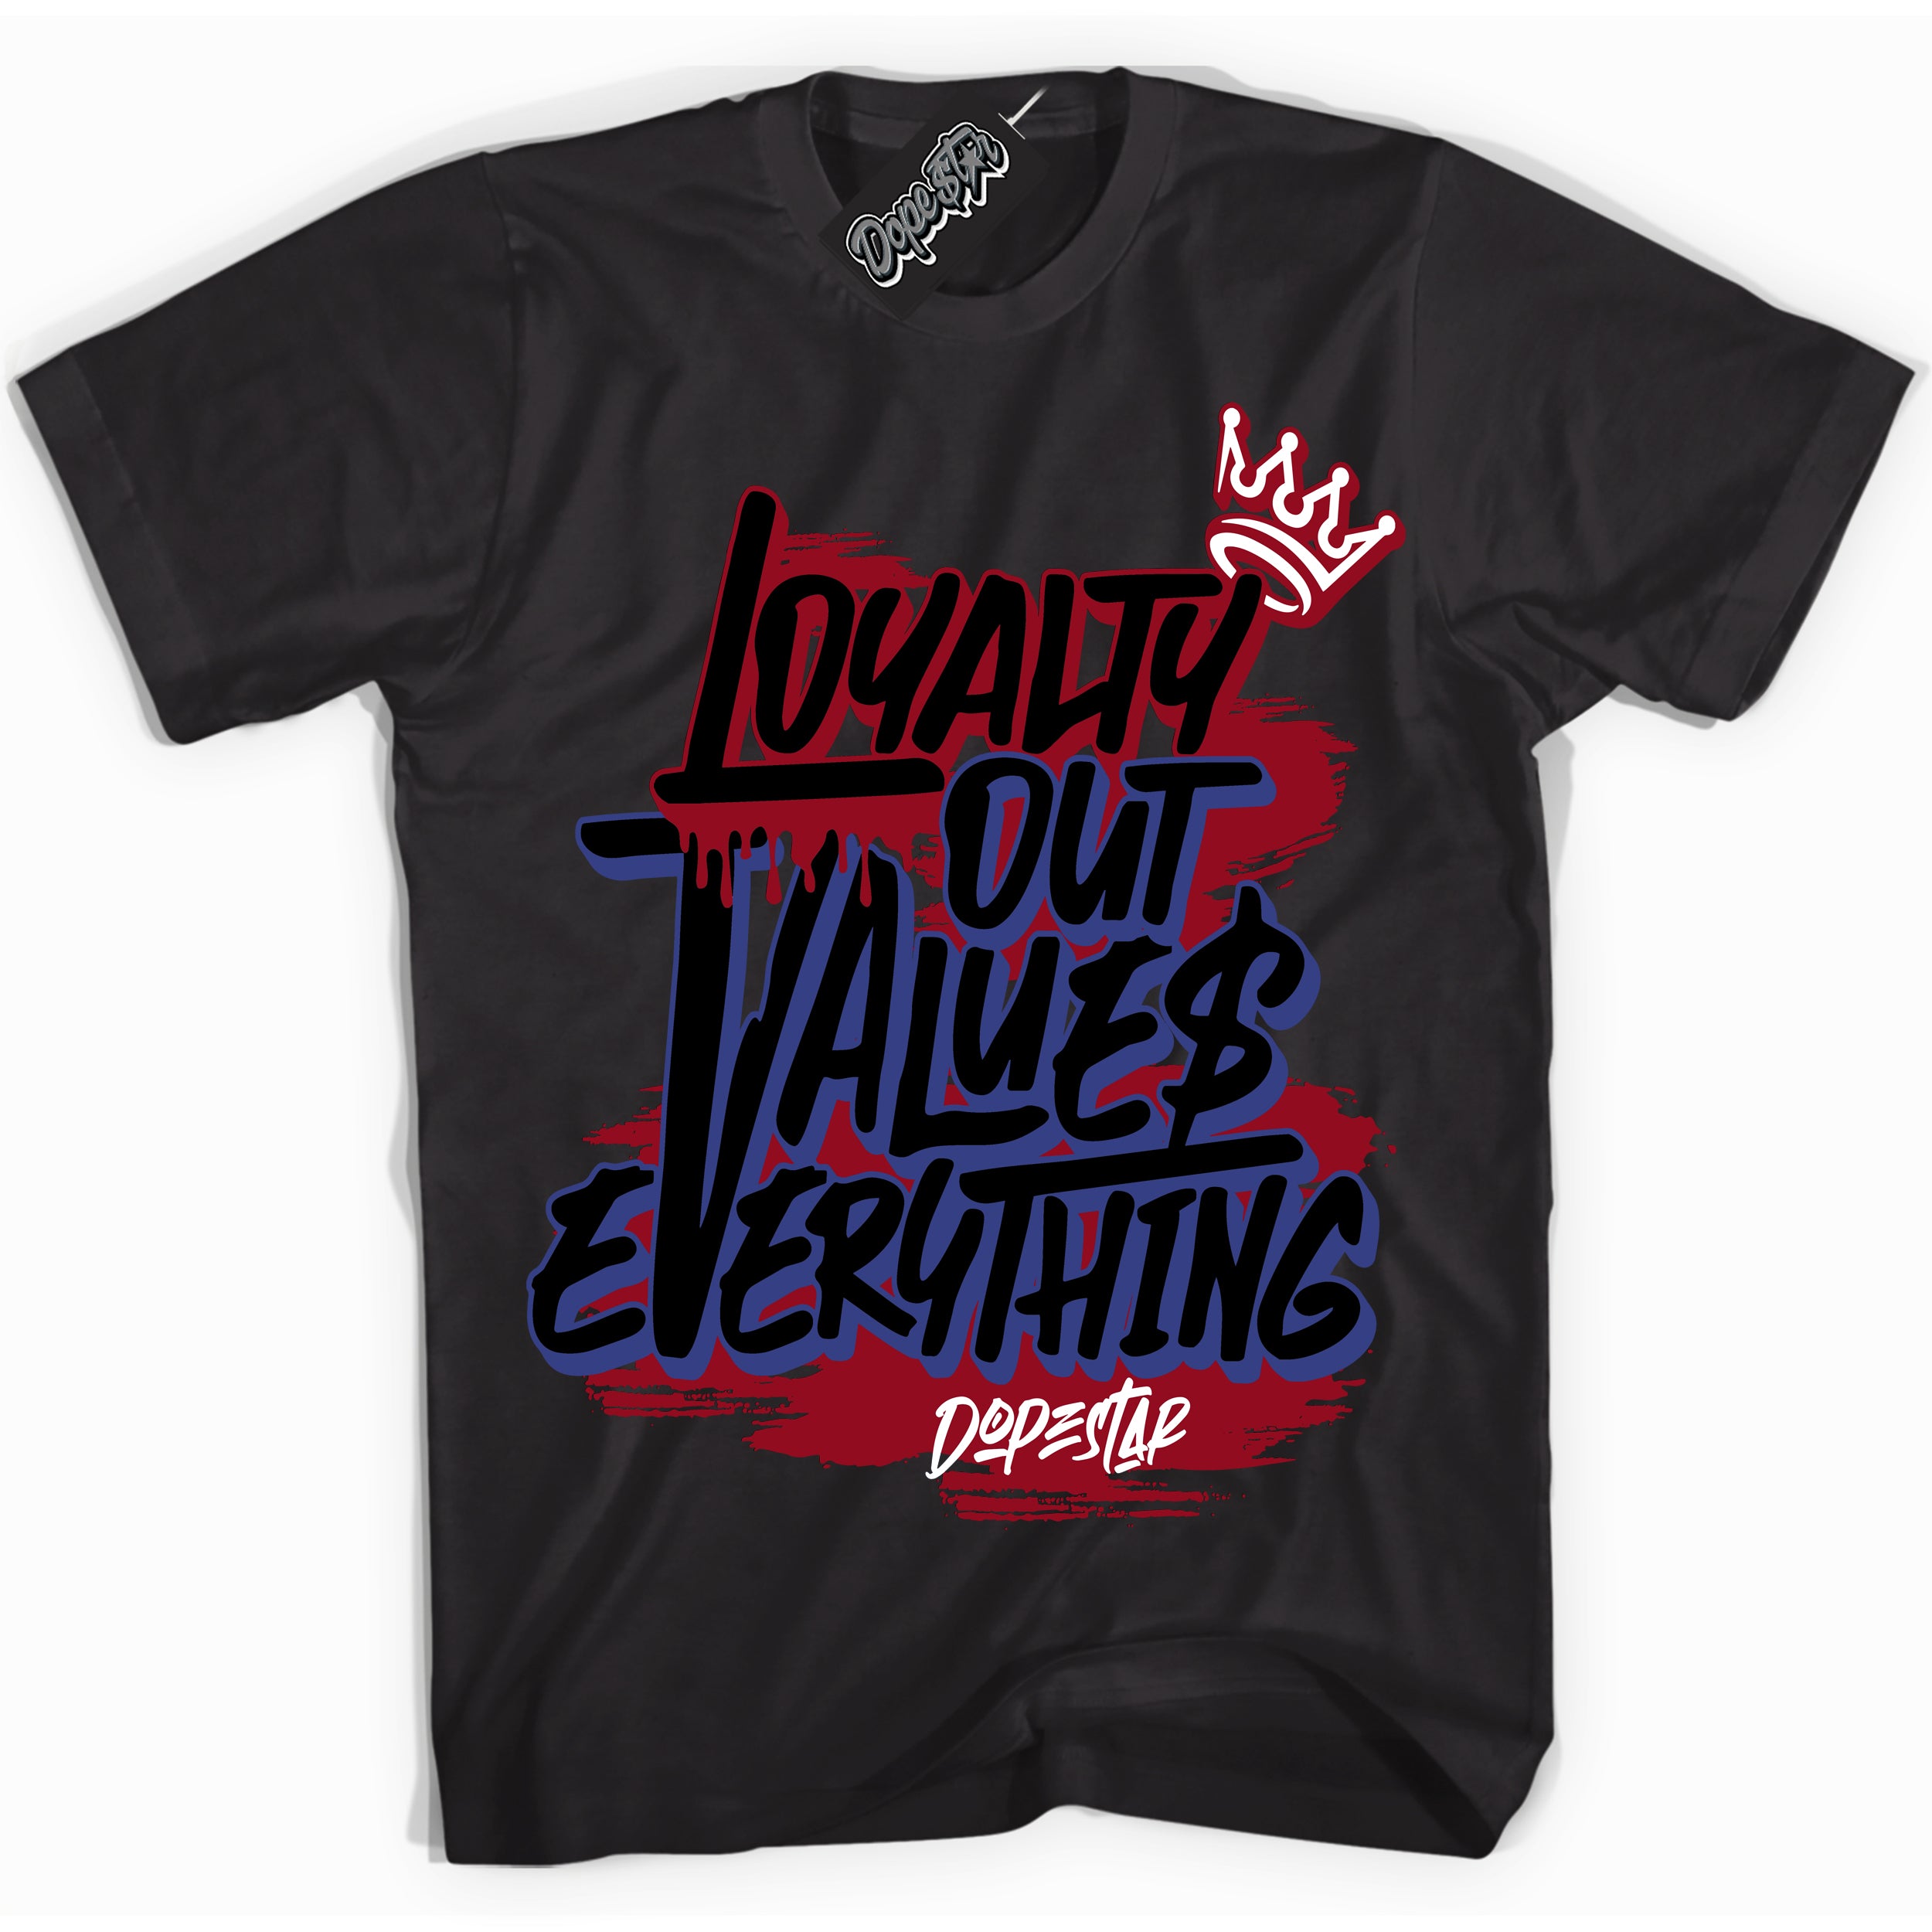 Cool Black Shirt with “ Loyalty Out Values Everything” design that perfectly matches Playoffs 8s Sneakers.